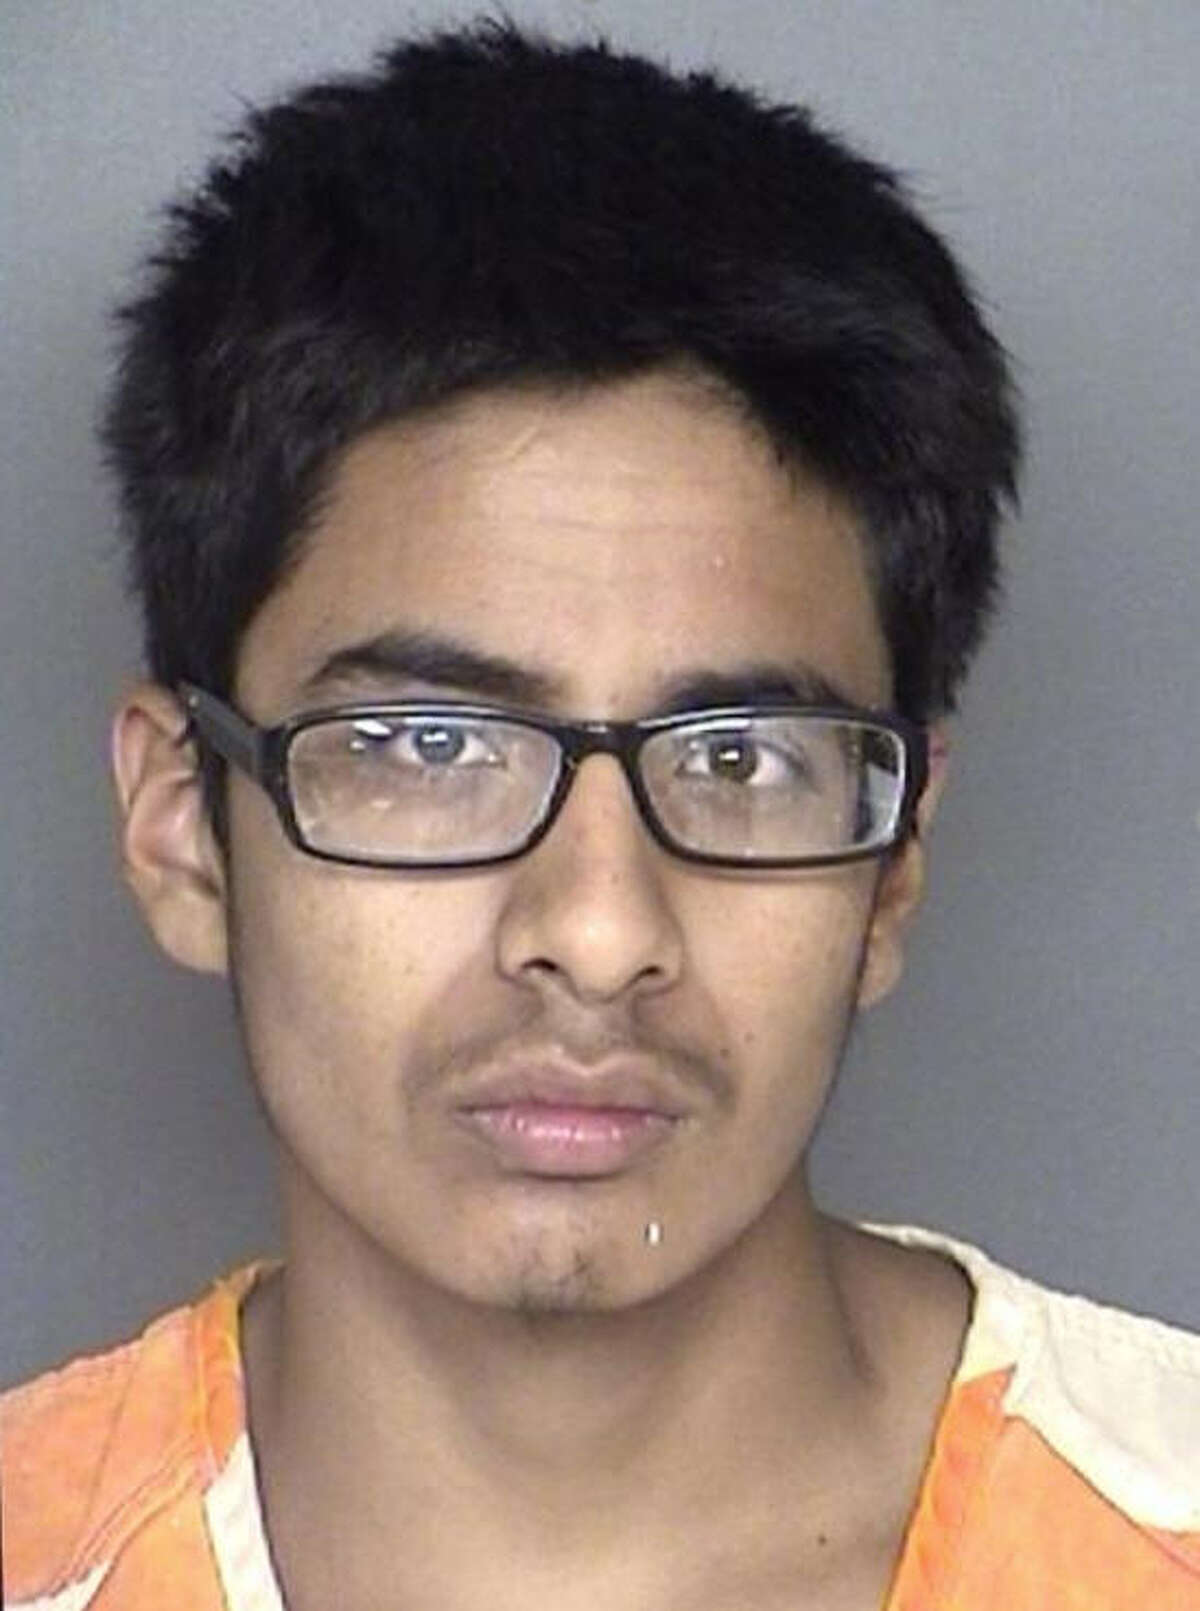 Raul Garcia, 17, is accused of shooting a 16-year-old male during a challenge known as "You lackin?" The game involves pointing guns at each other.See what some of the popular social media challenges have been in recent years. 